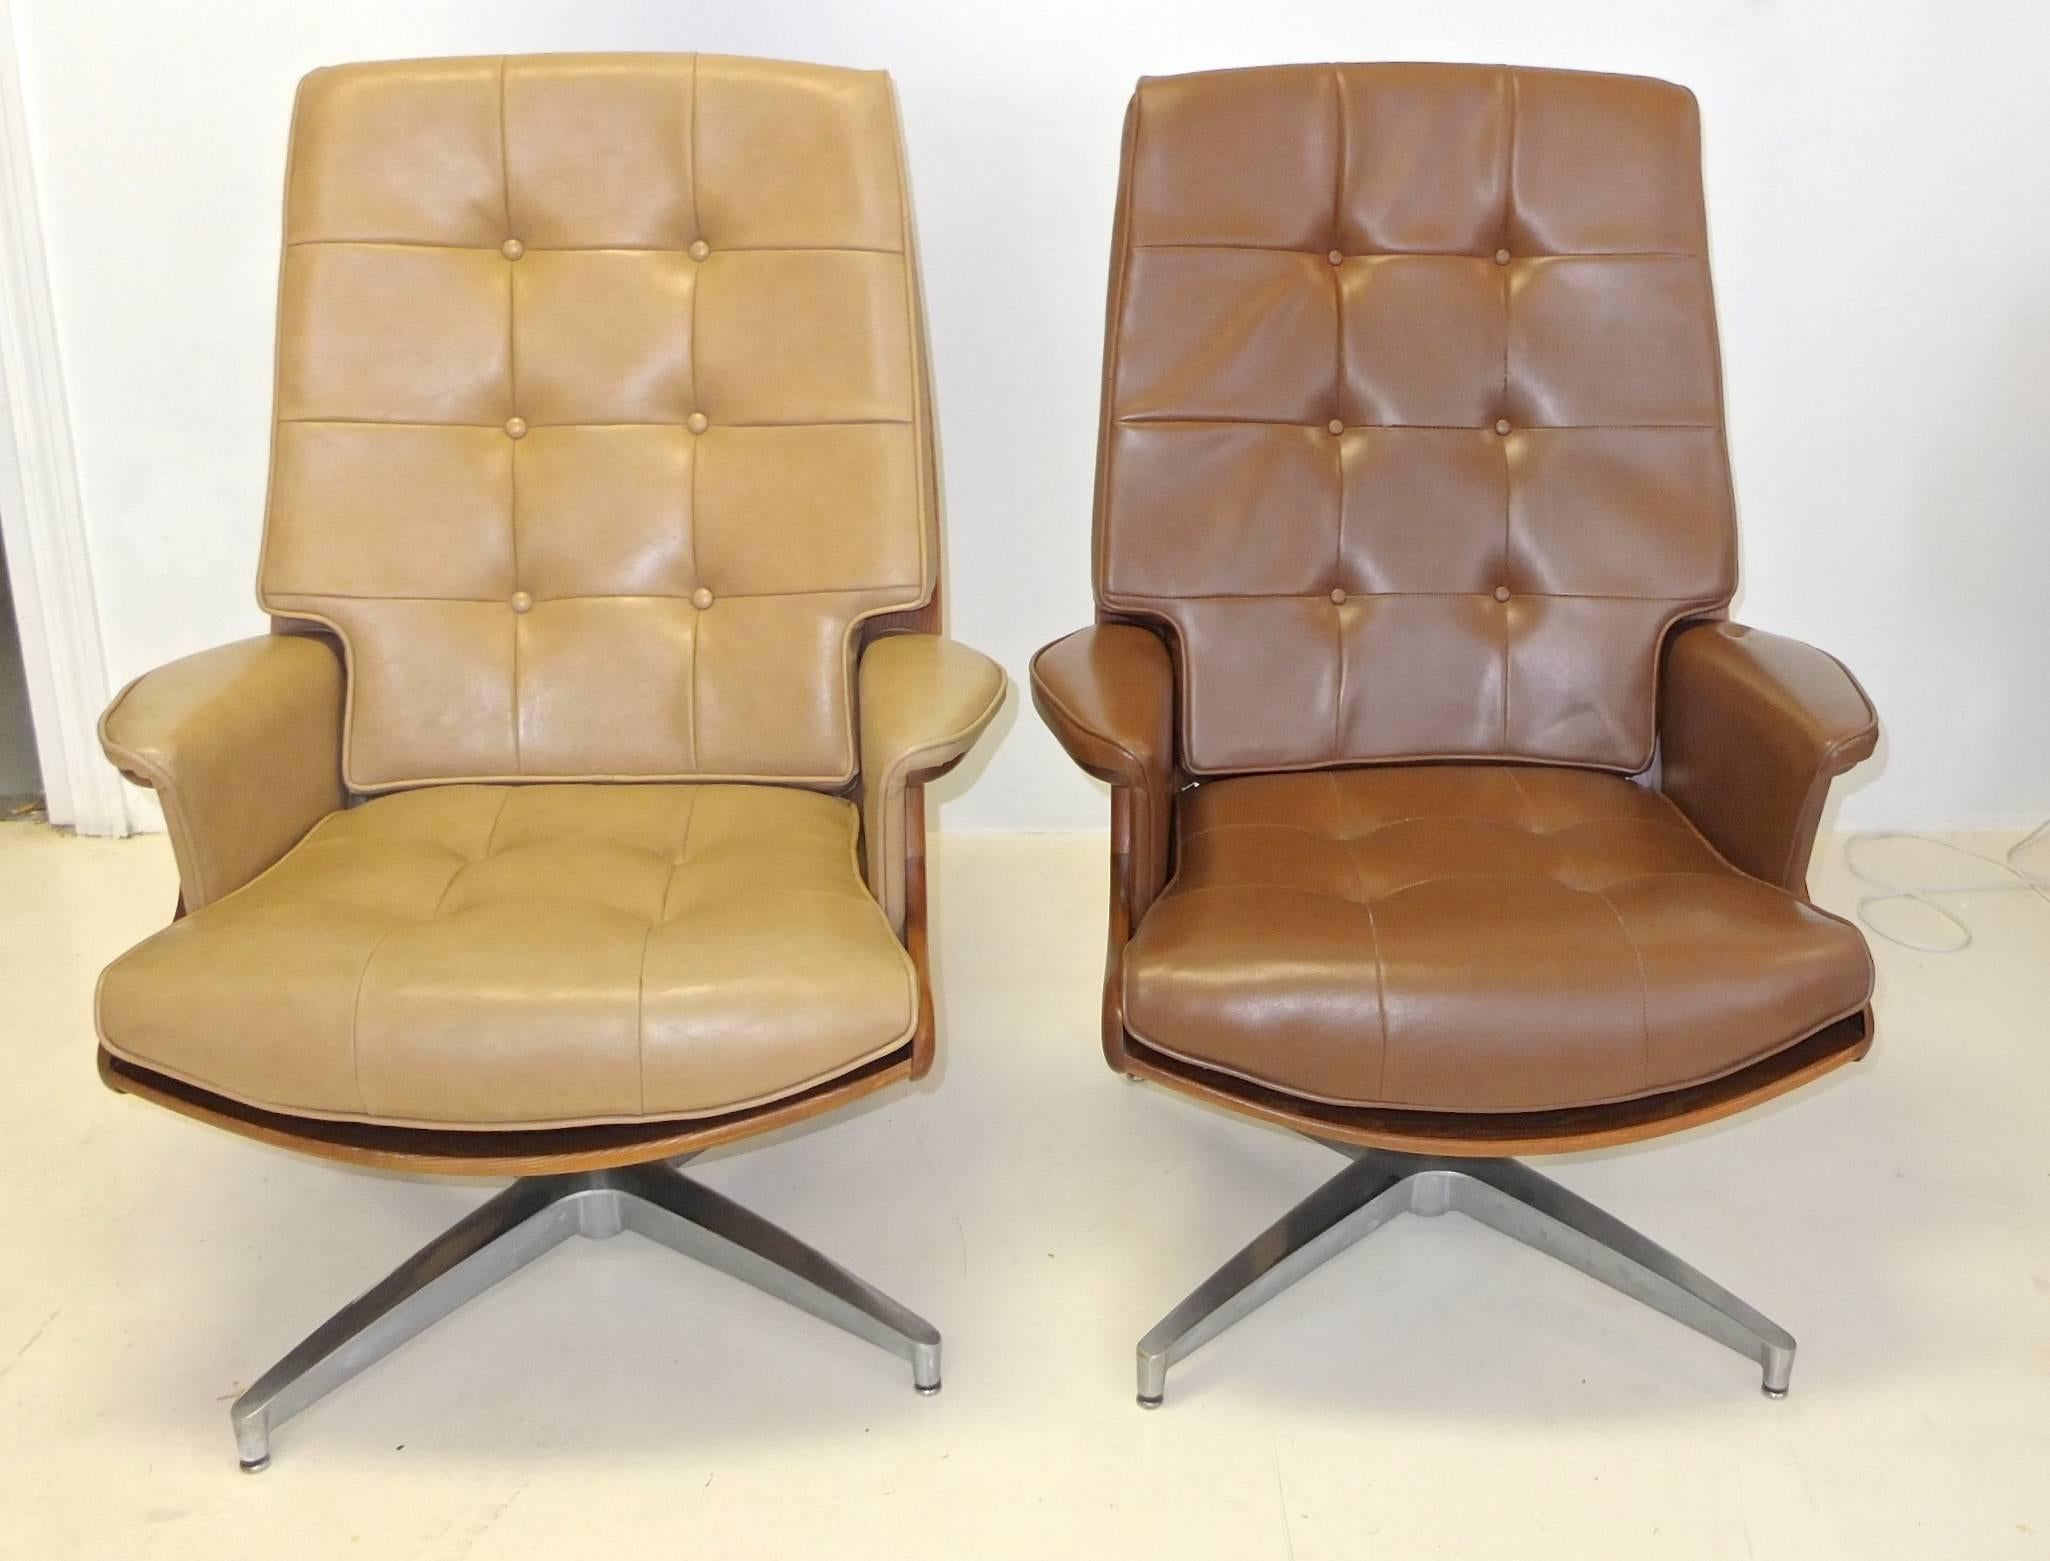 
Stylish pair of swiveling lounge chairs by Heywood Wakefield of Gardener, Massachusetts. 

Price is for the pair.